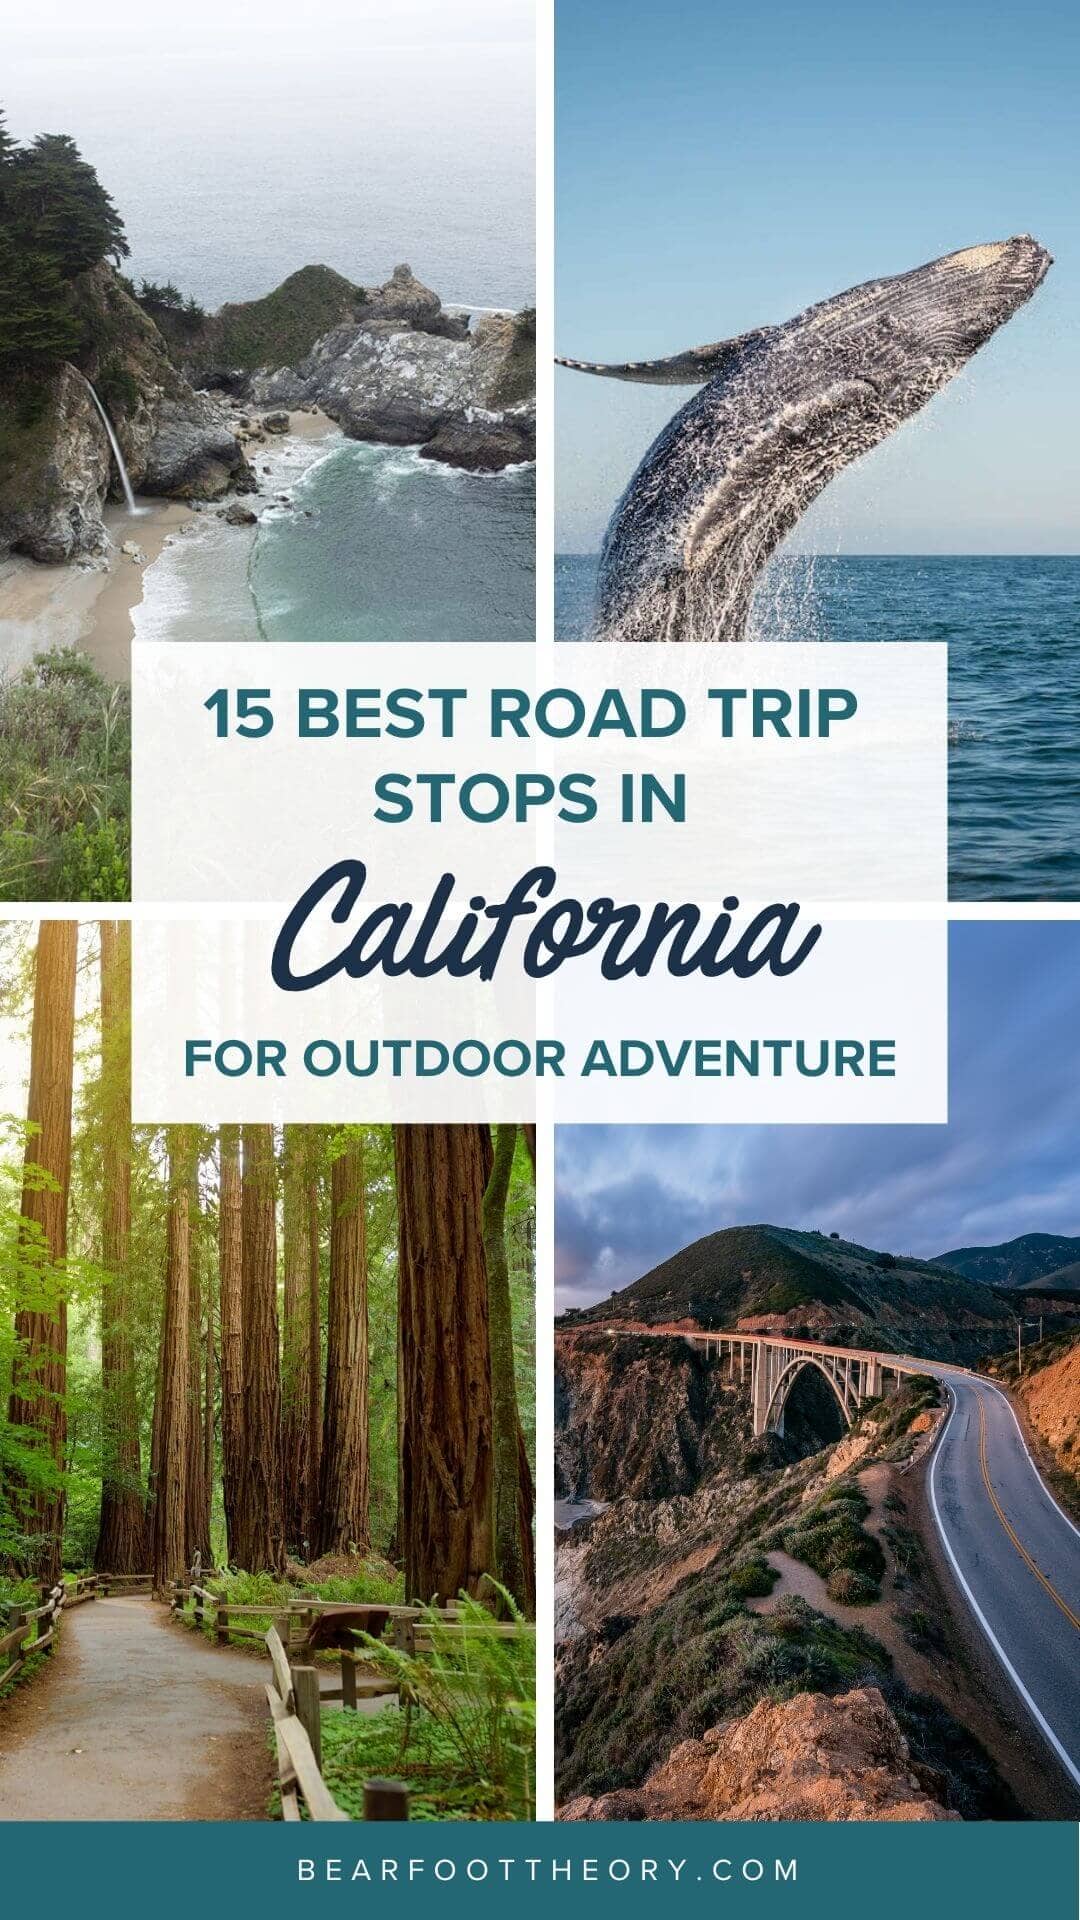 See the best California road trips stops for outdoor adventure including California's National Parks, monuments, coastal towns, and more.